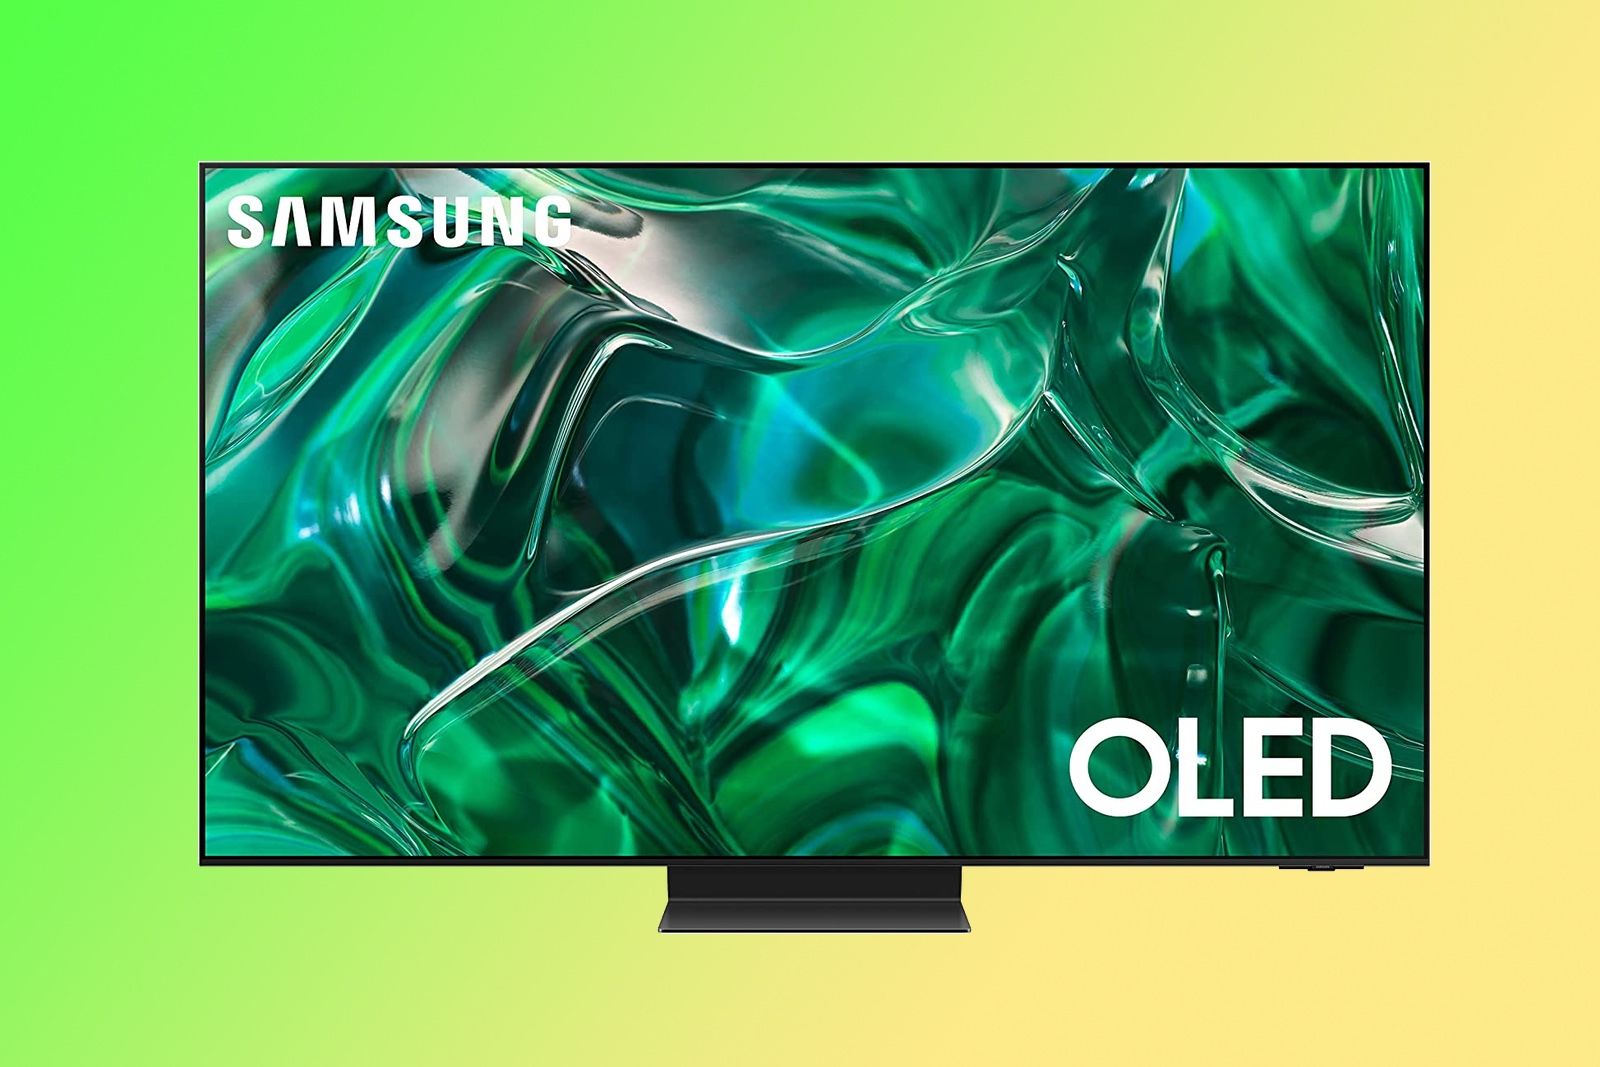 Samsung S95C OLED TV on a green and yellow background